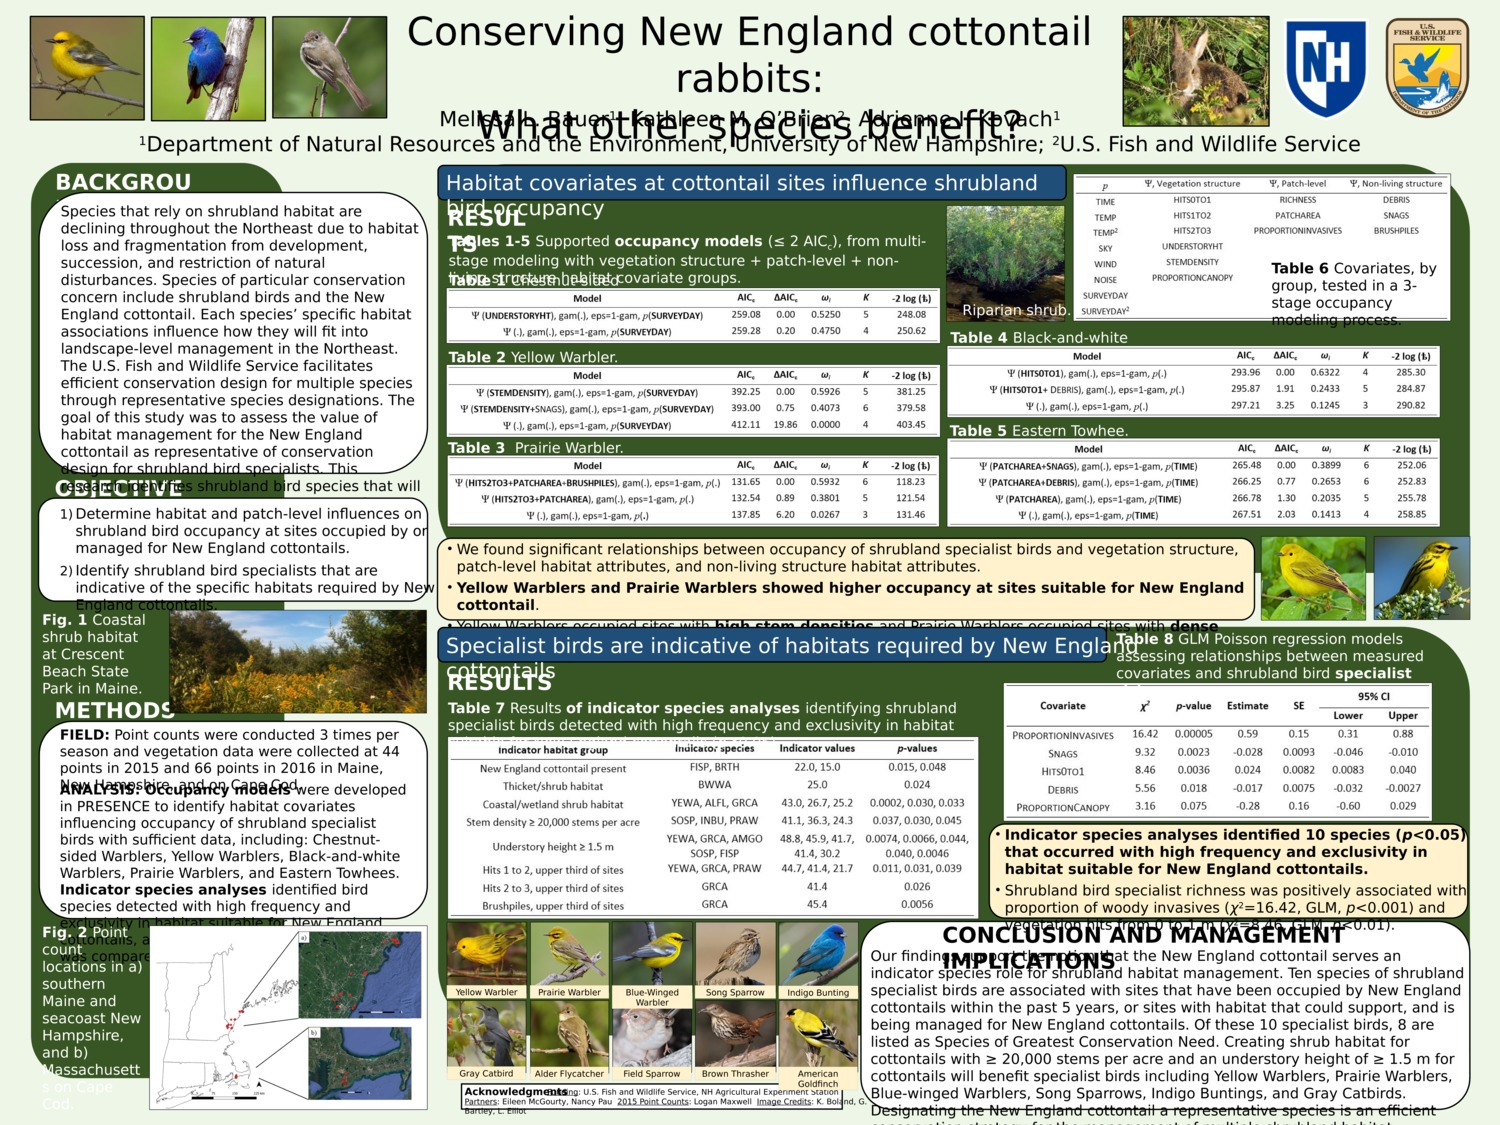 Conserving New England Cottontail Rabbits: What Other Species Benefit? by mle1003